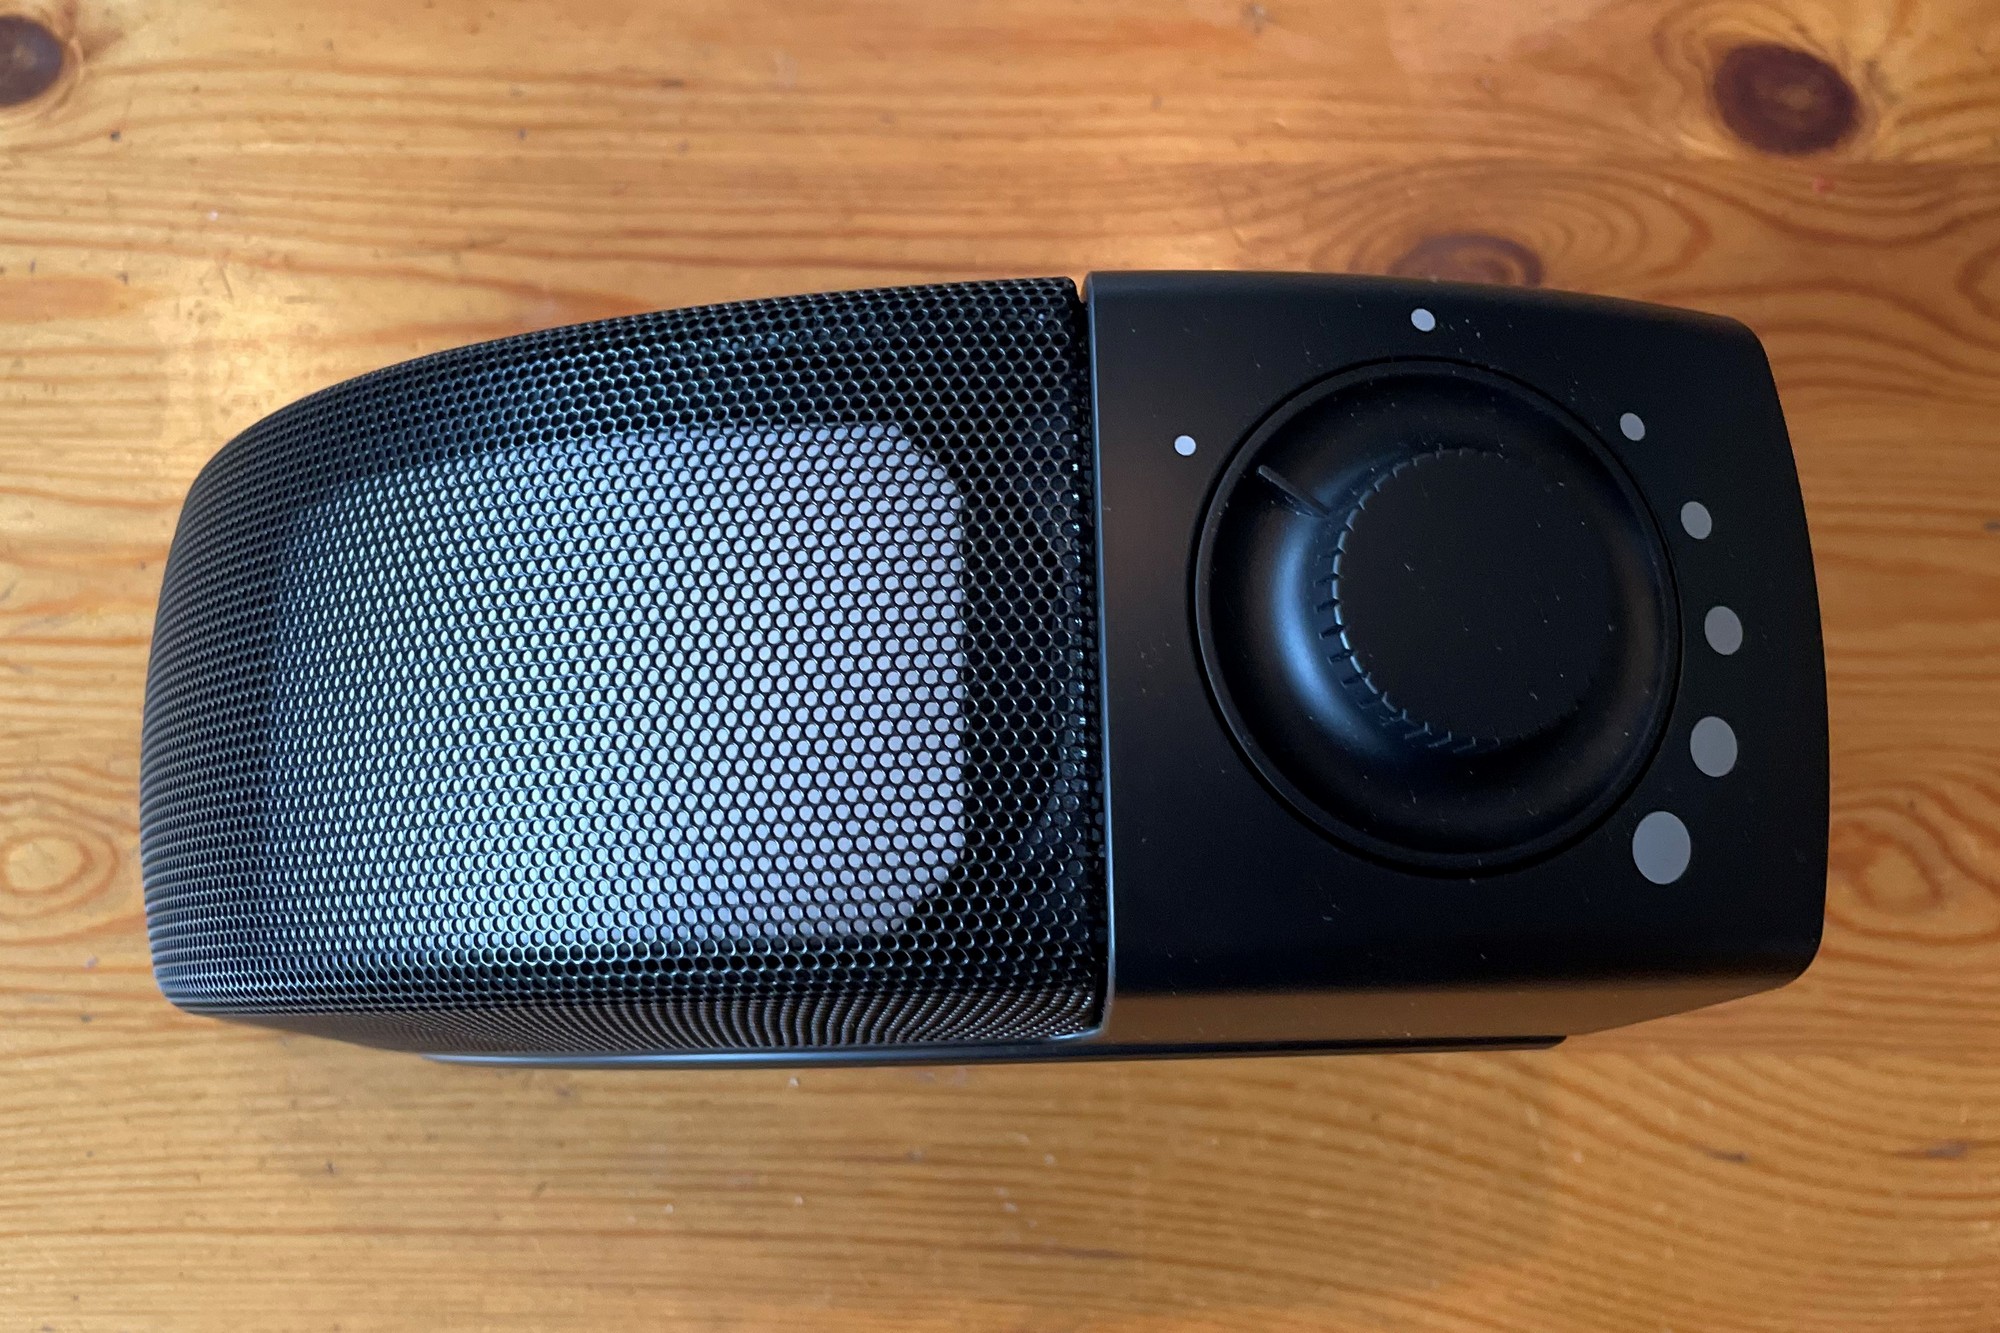 Mirai Speaker review : This TV speaker throws a wicked curve